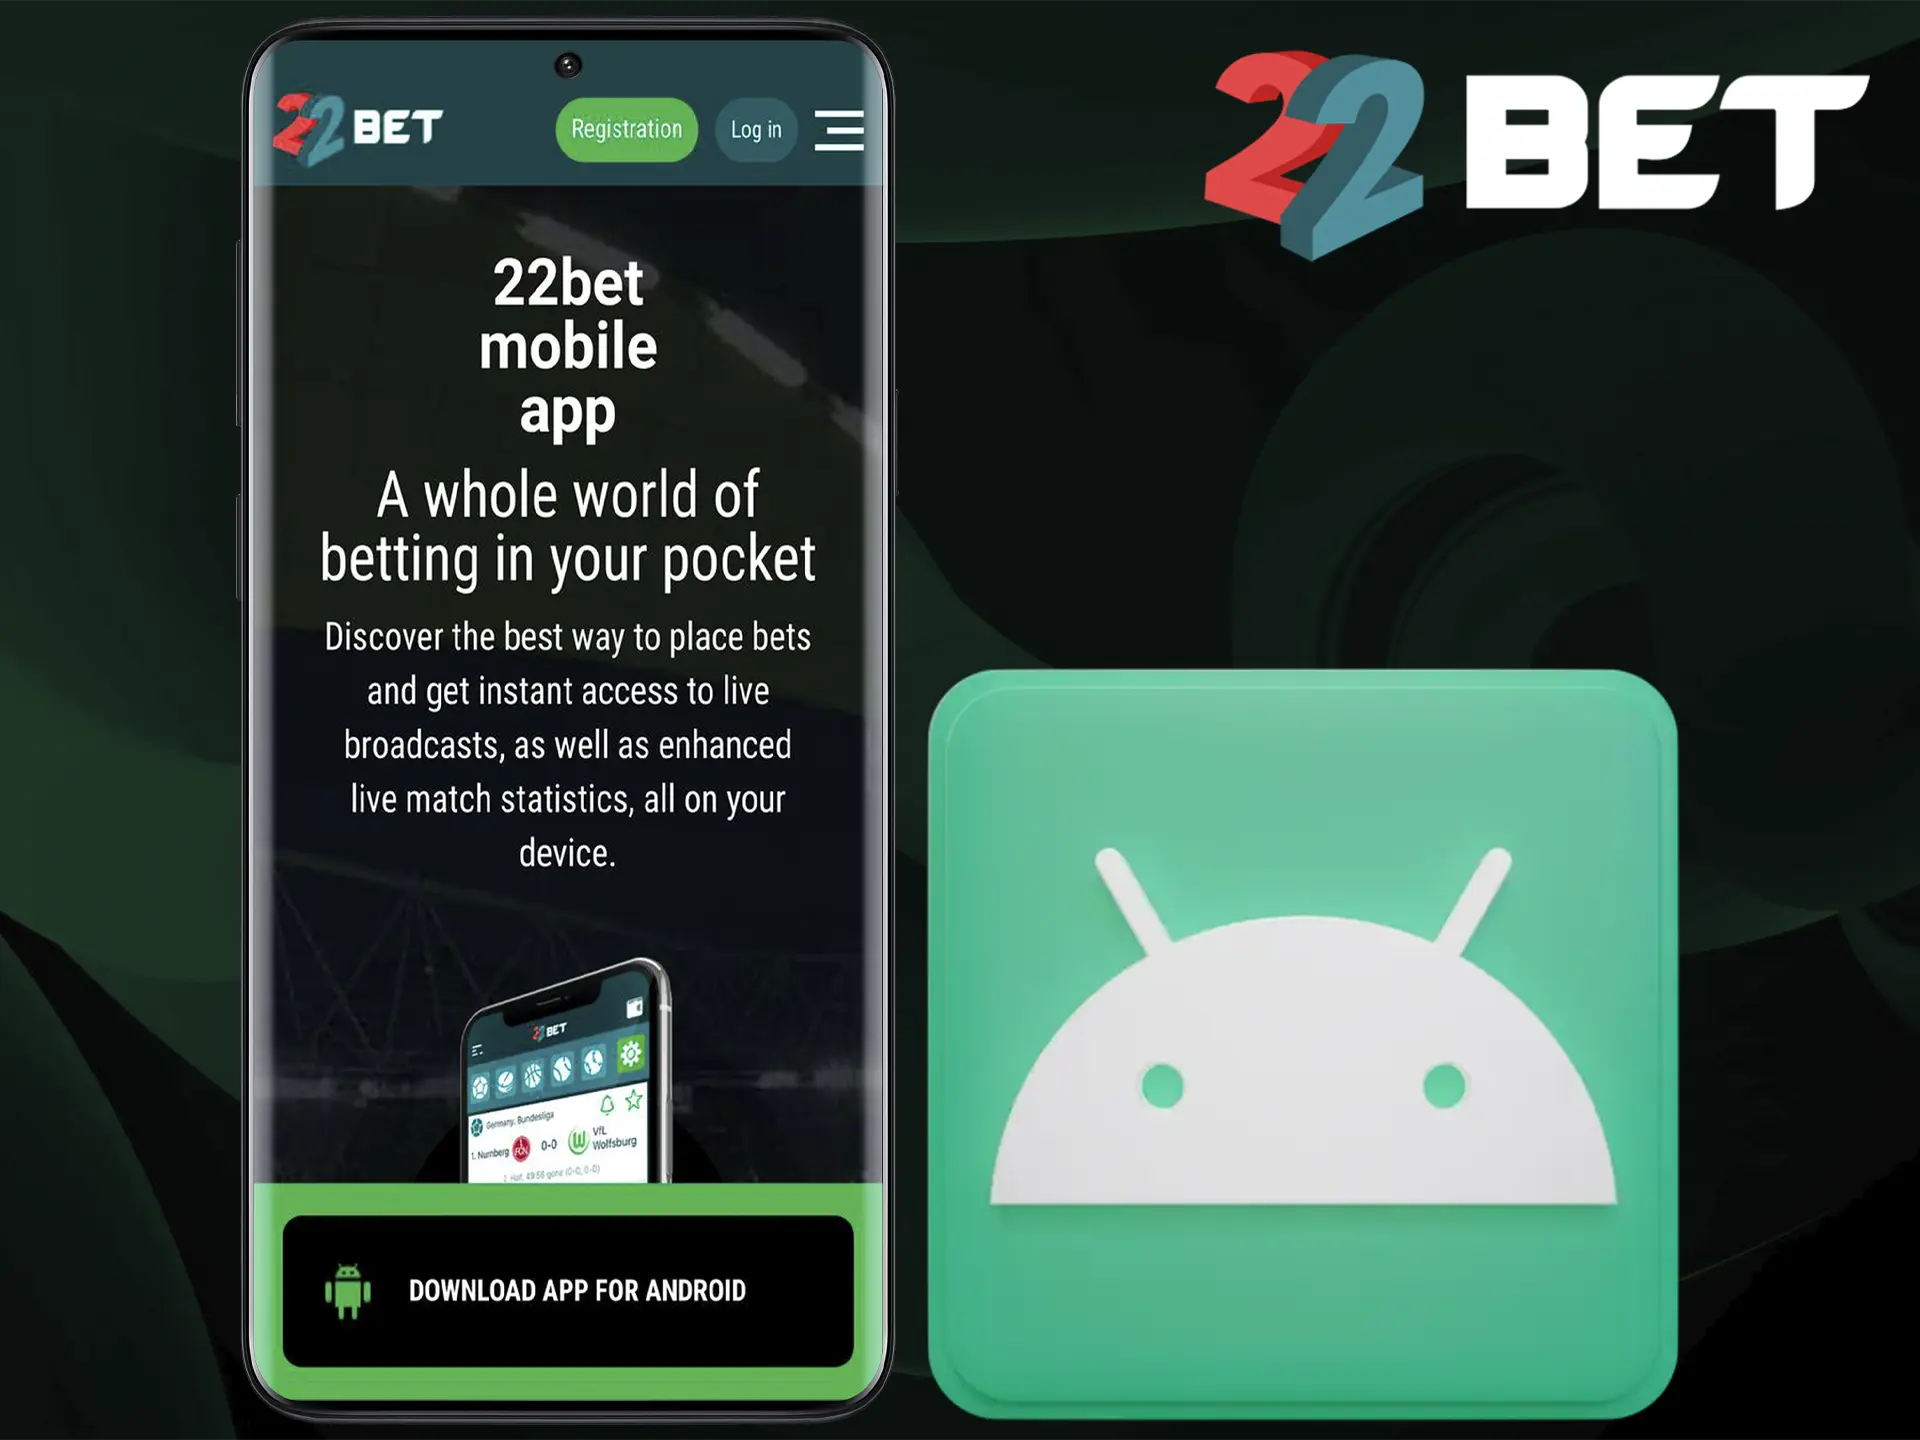 The 22Bet app will give you the opportunity to bet anywhere in the world.